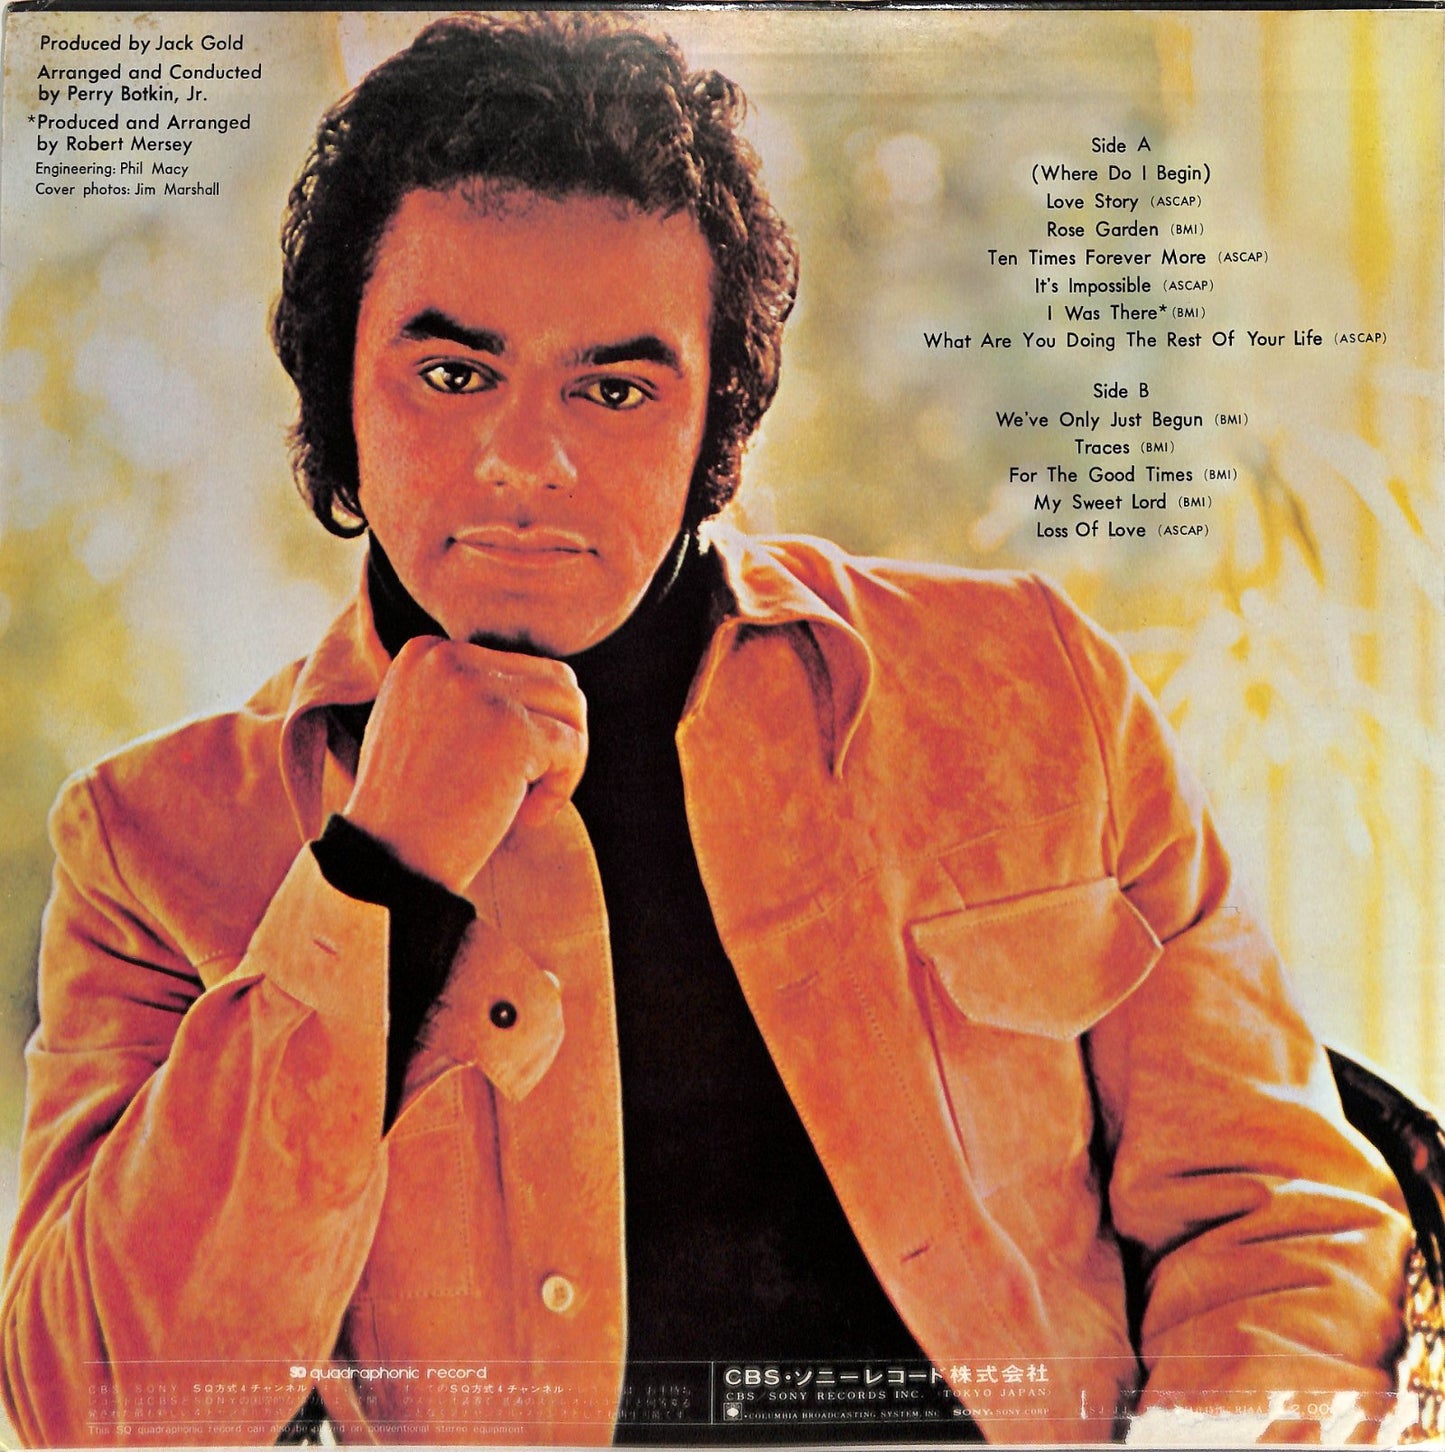 JOHNNY MATHIS - Love Story